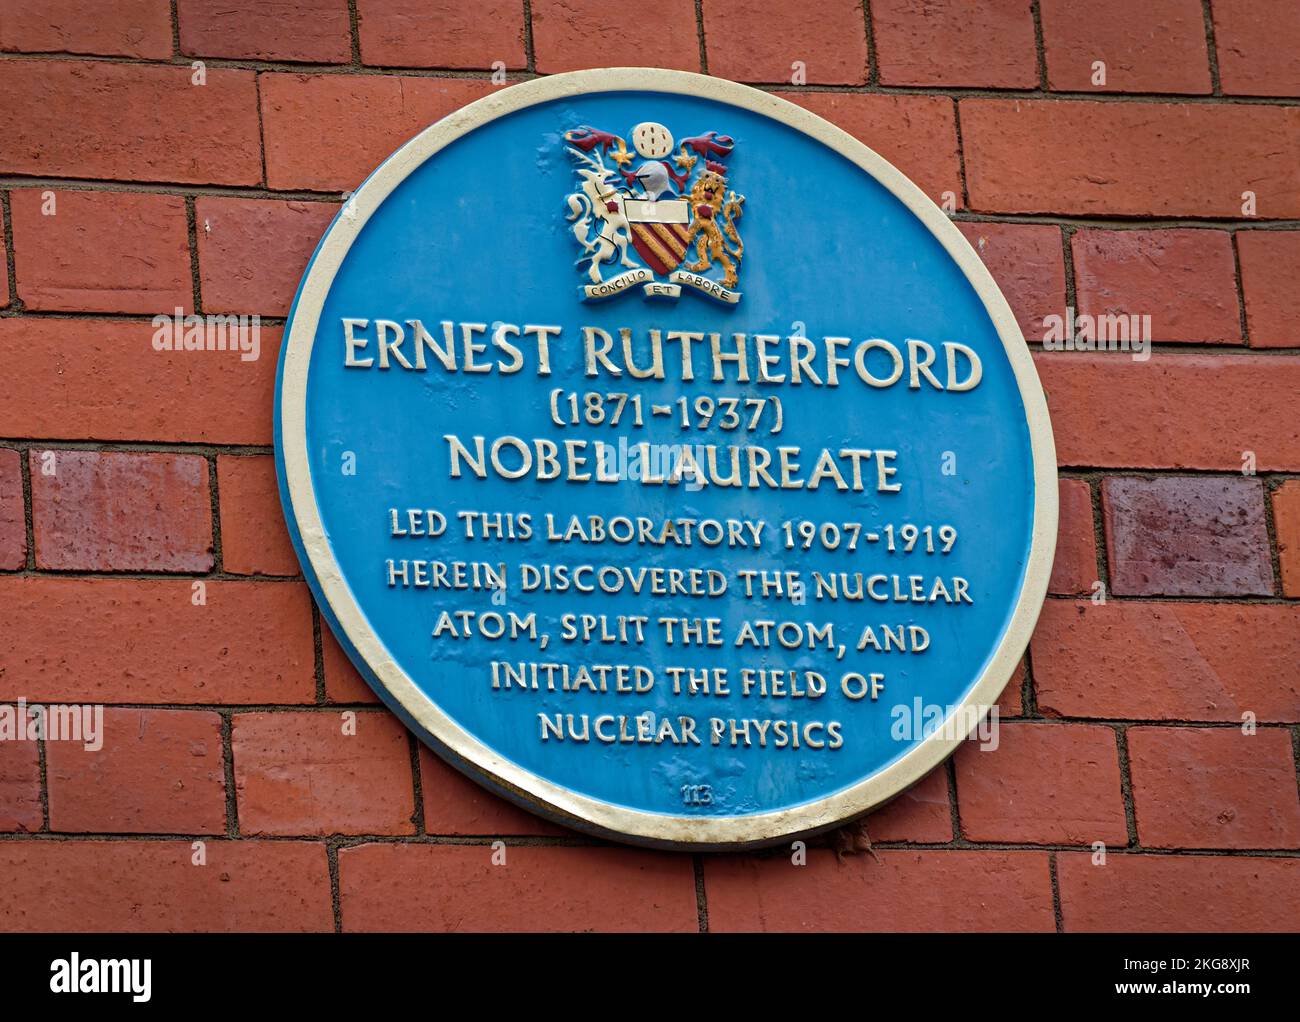 Blue Plate in Manchester University's Coupland Street celebrating work carried out there by Ernest Rutherford,splitting the Atom and Nuclear Physics. Stock Photo